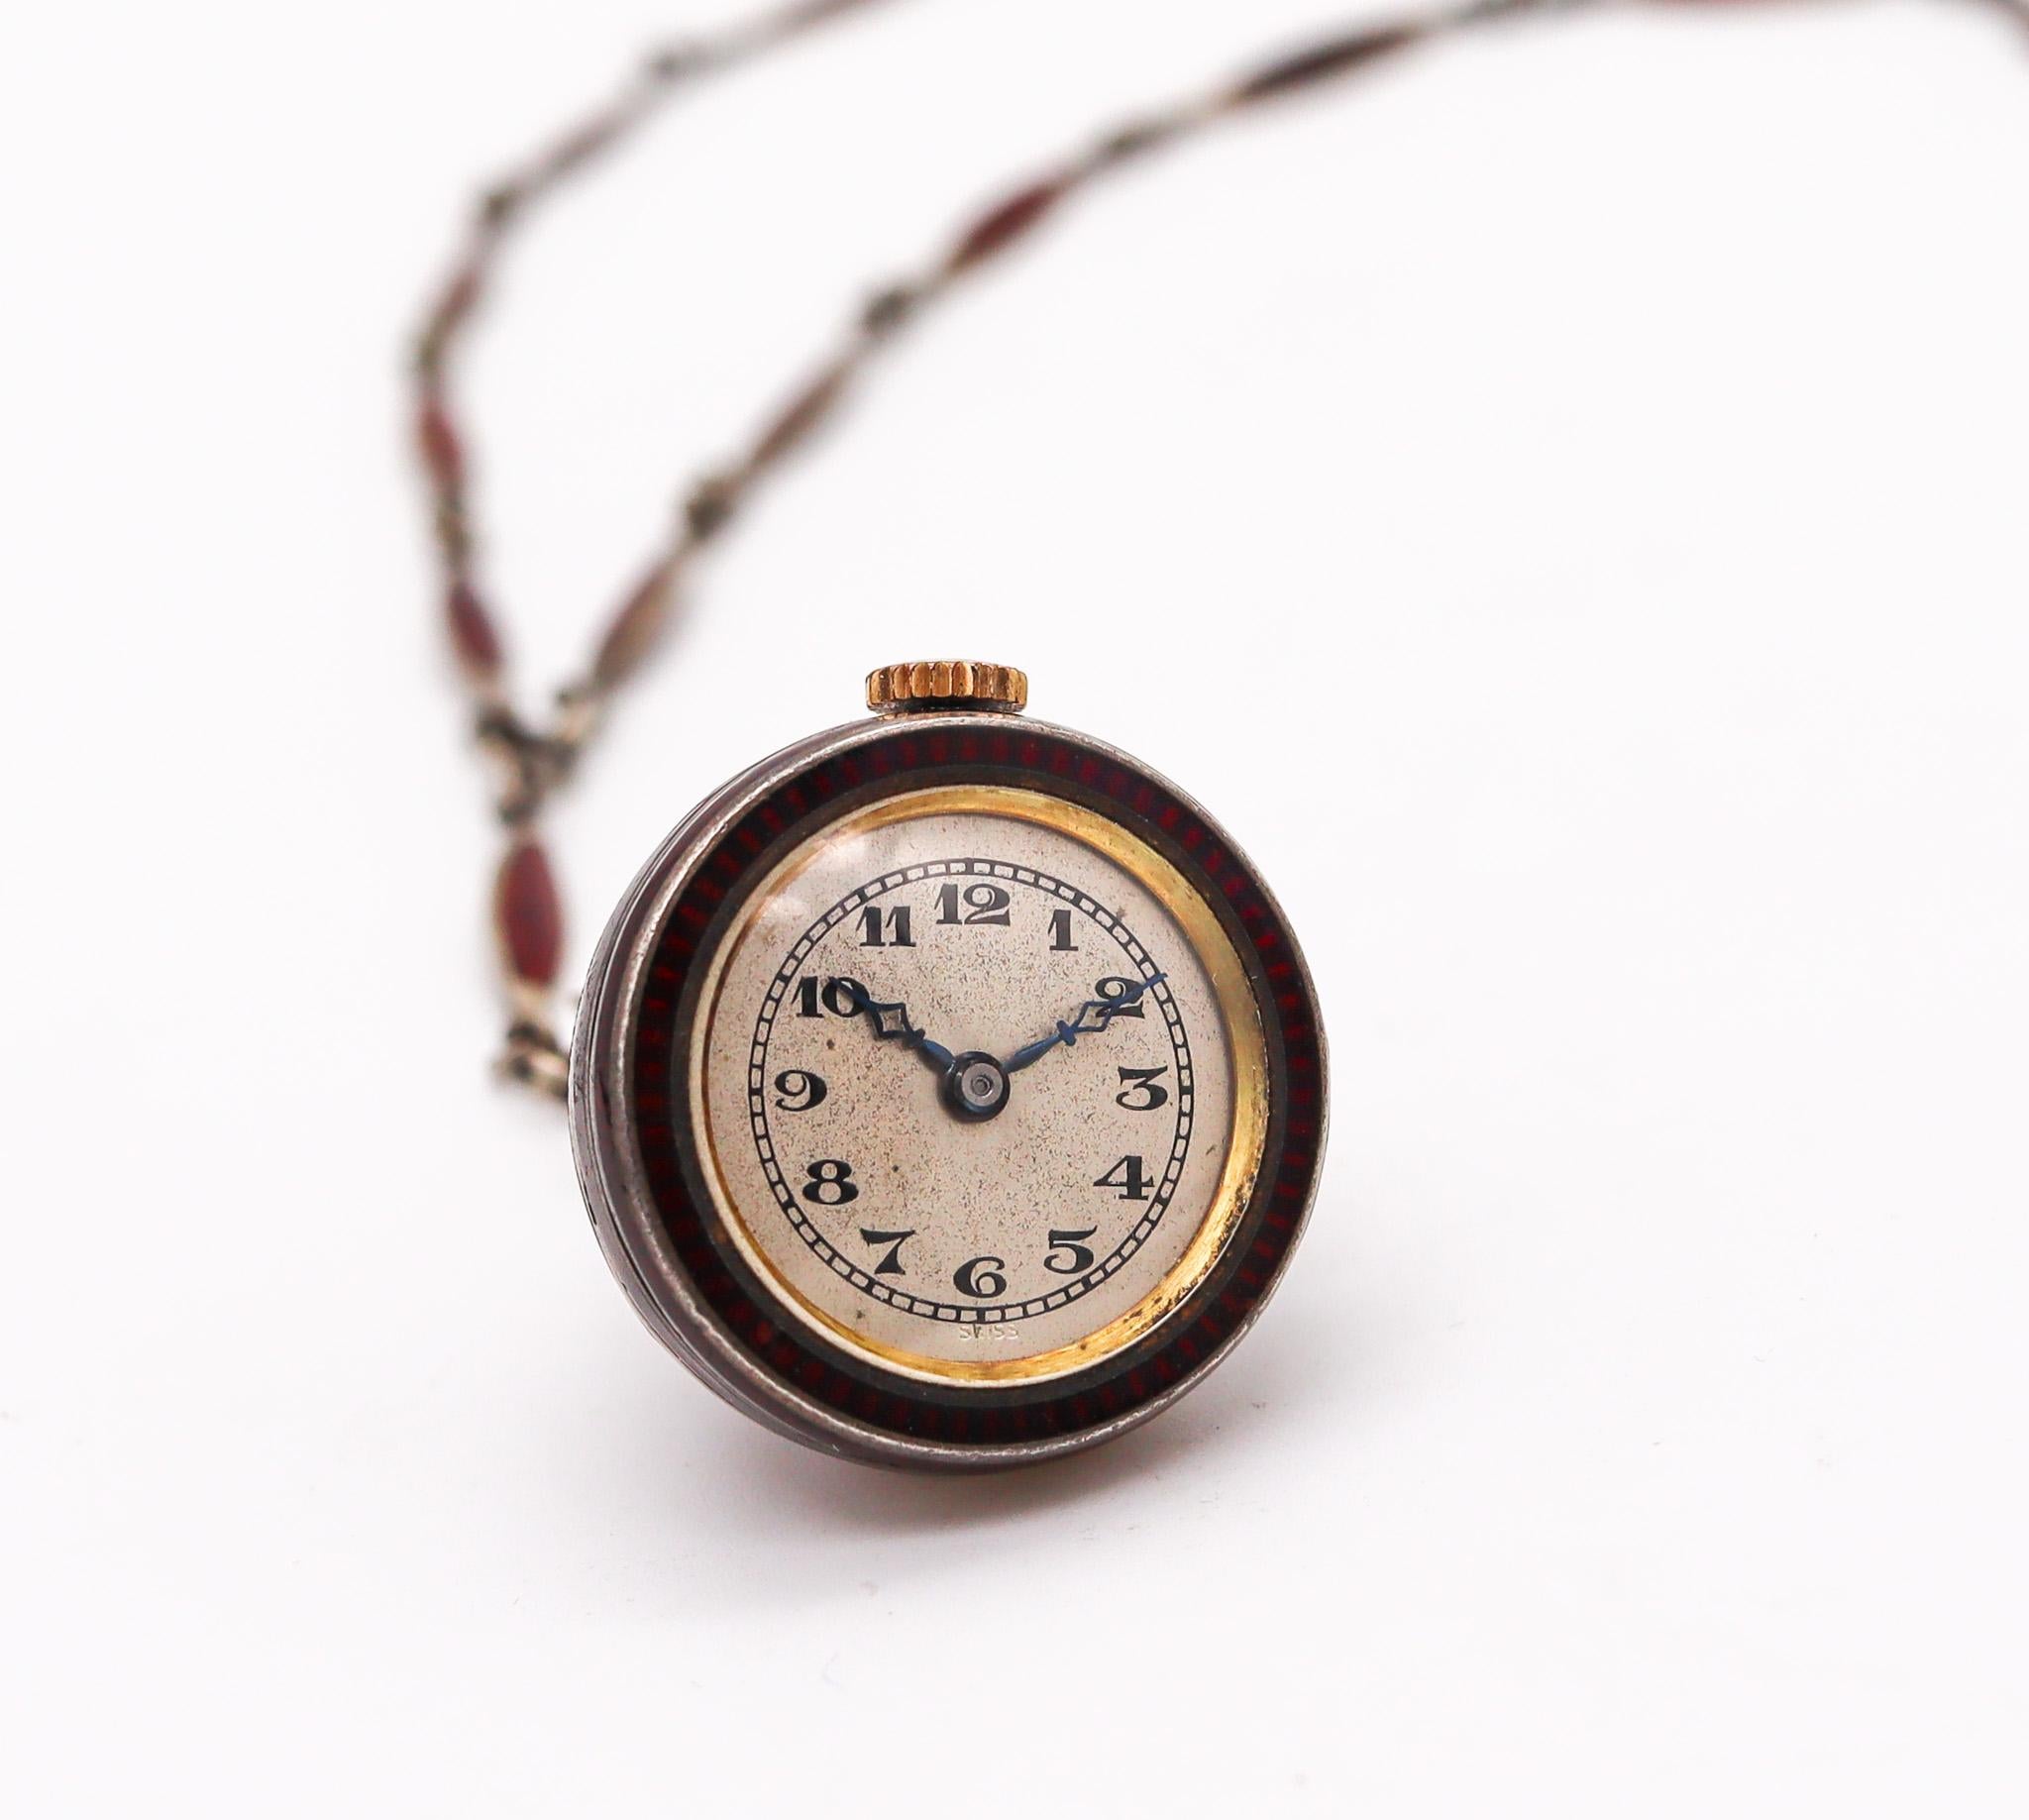 Art deco lavalier necklace with clock.

Beautiful lavalier necklace, created during the art deco period in Switzerland, back in the 1920. Carefully crafted in solid high purity .985/.999 silver and embellished with applications of red enamel over a